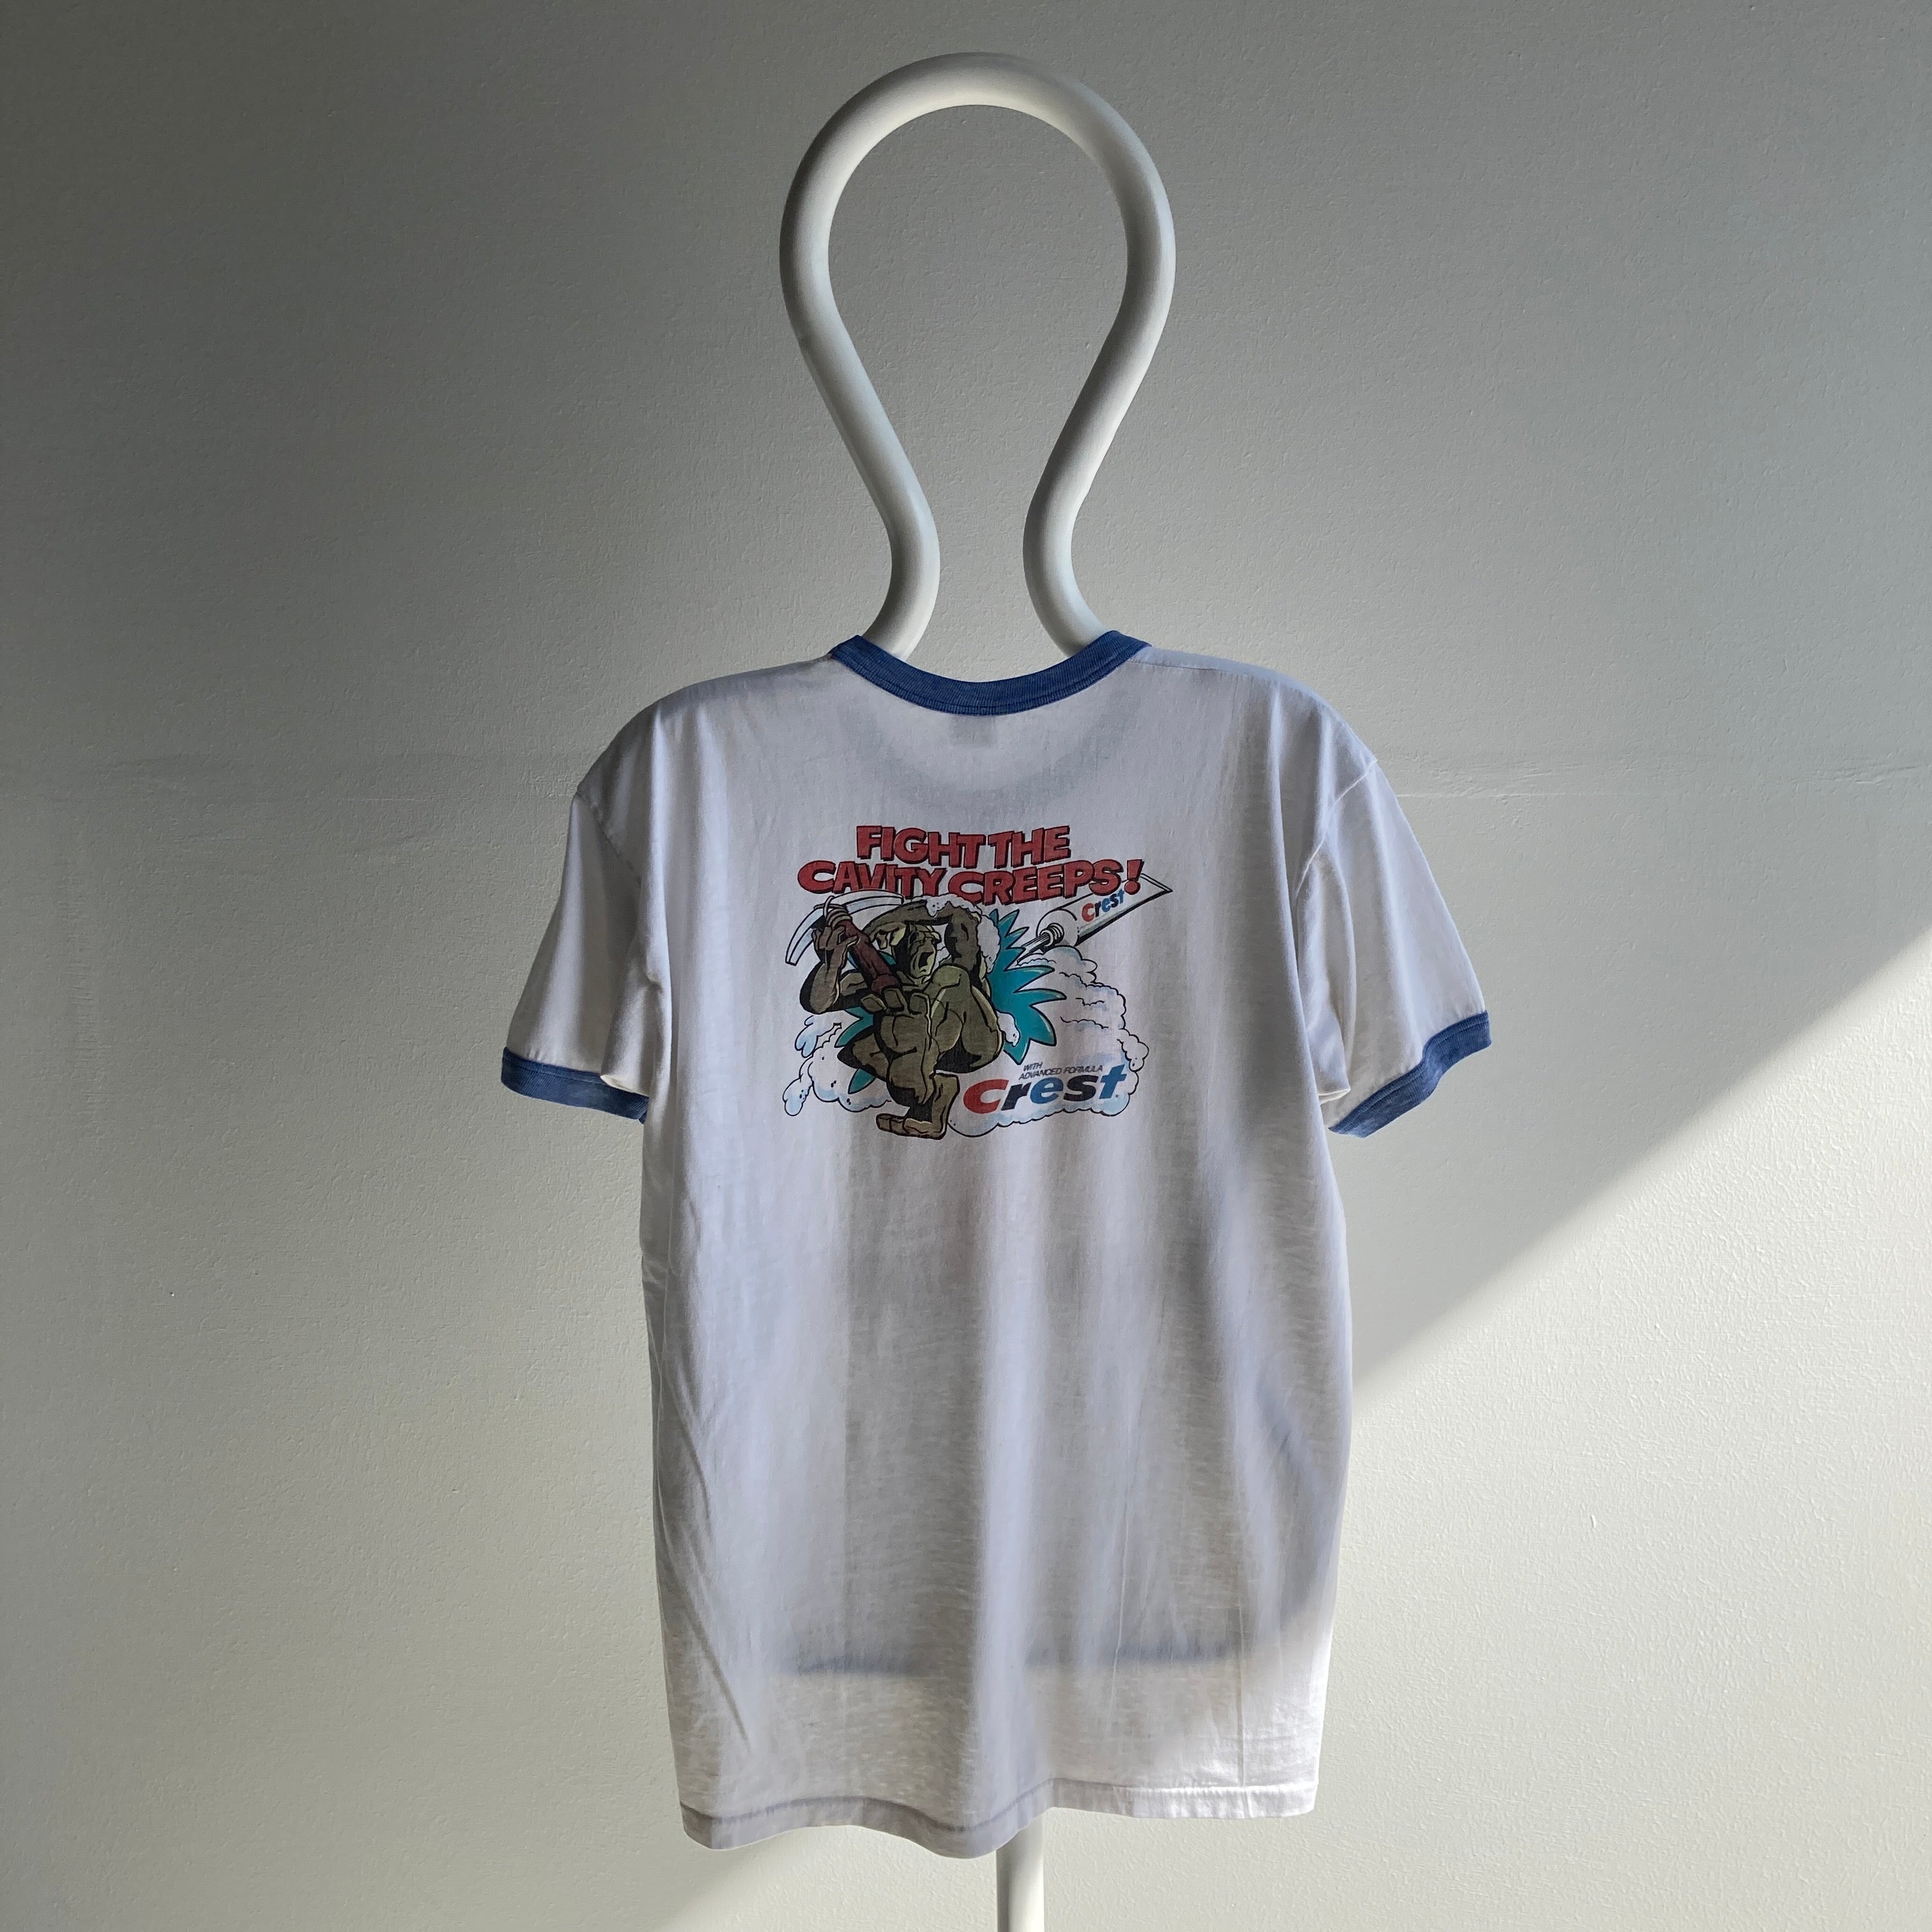 1970s Crest Toothpaste Ring T-Shirt by Velva Sheen - Front + Back